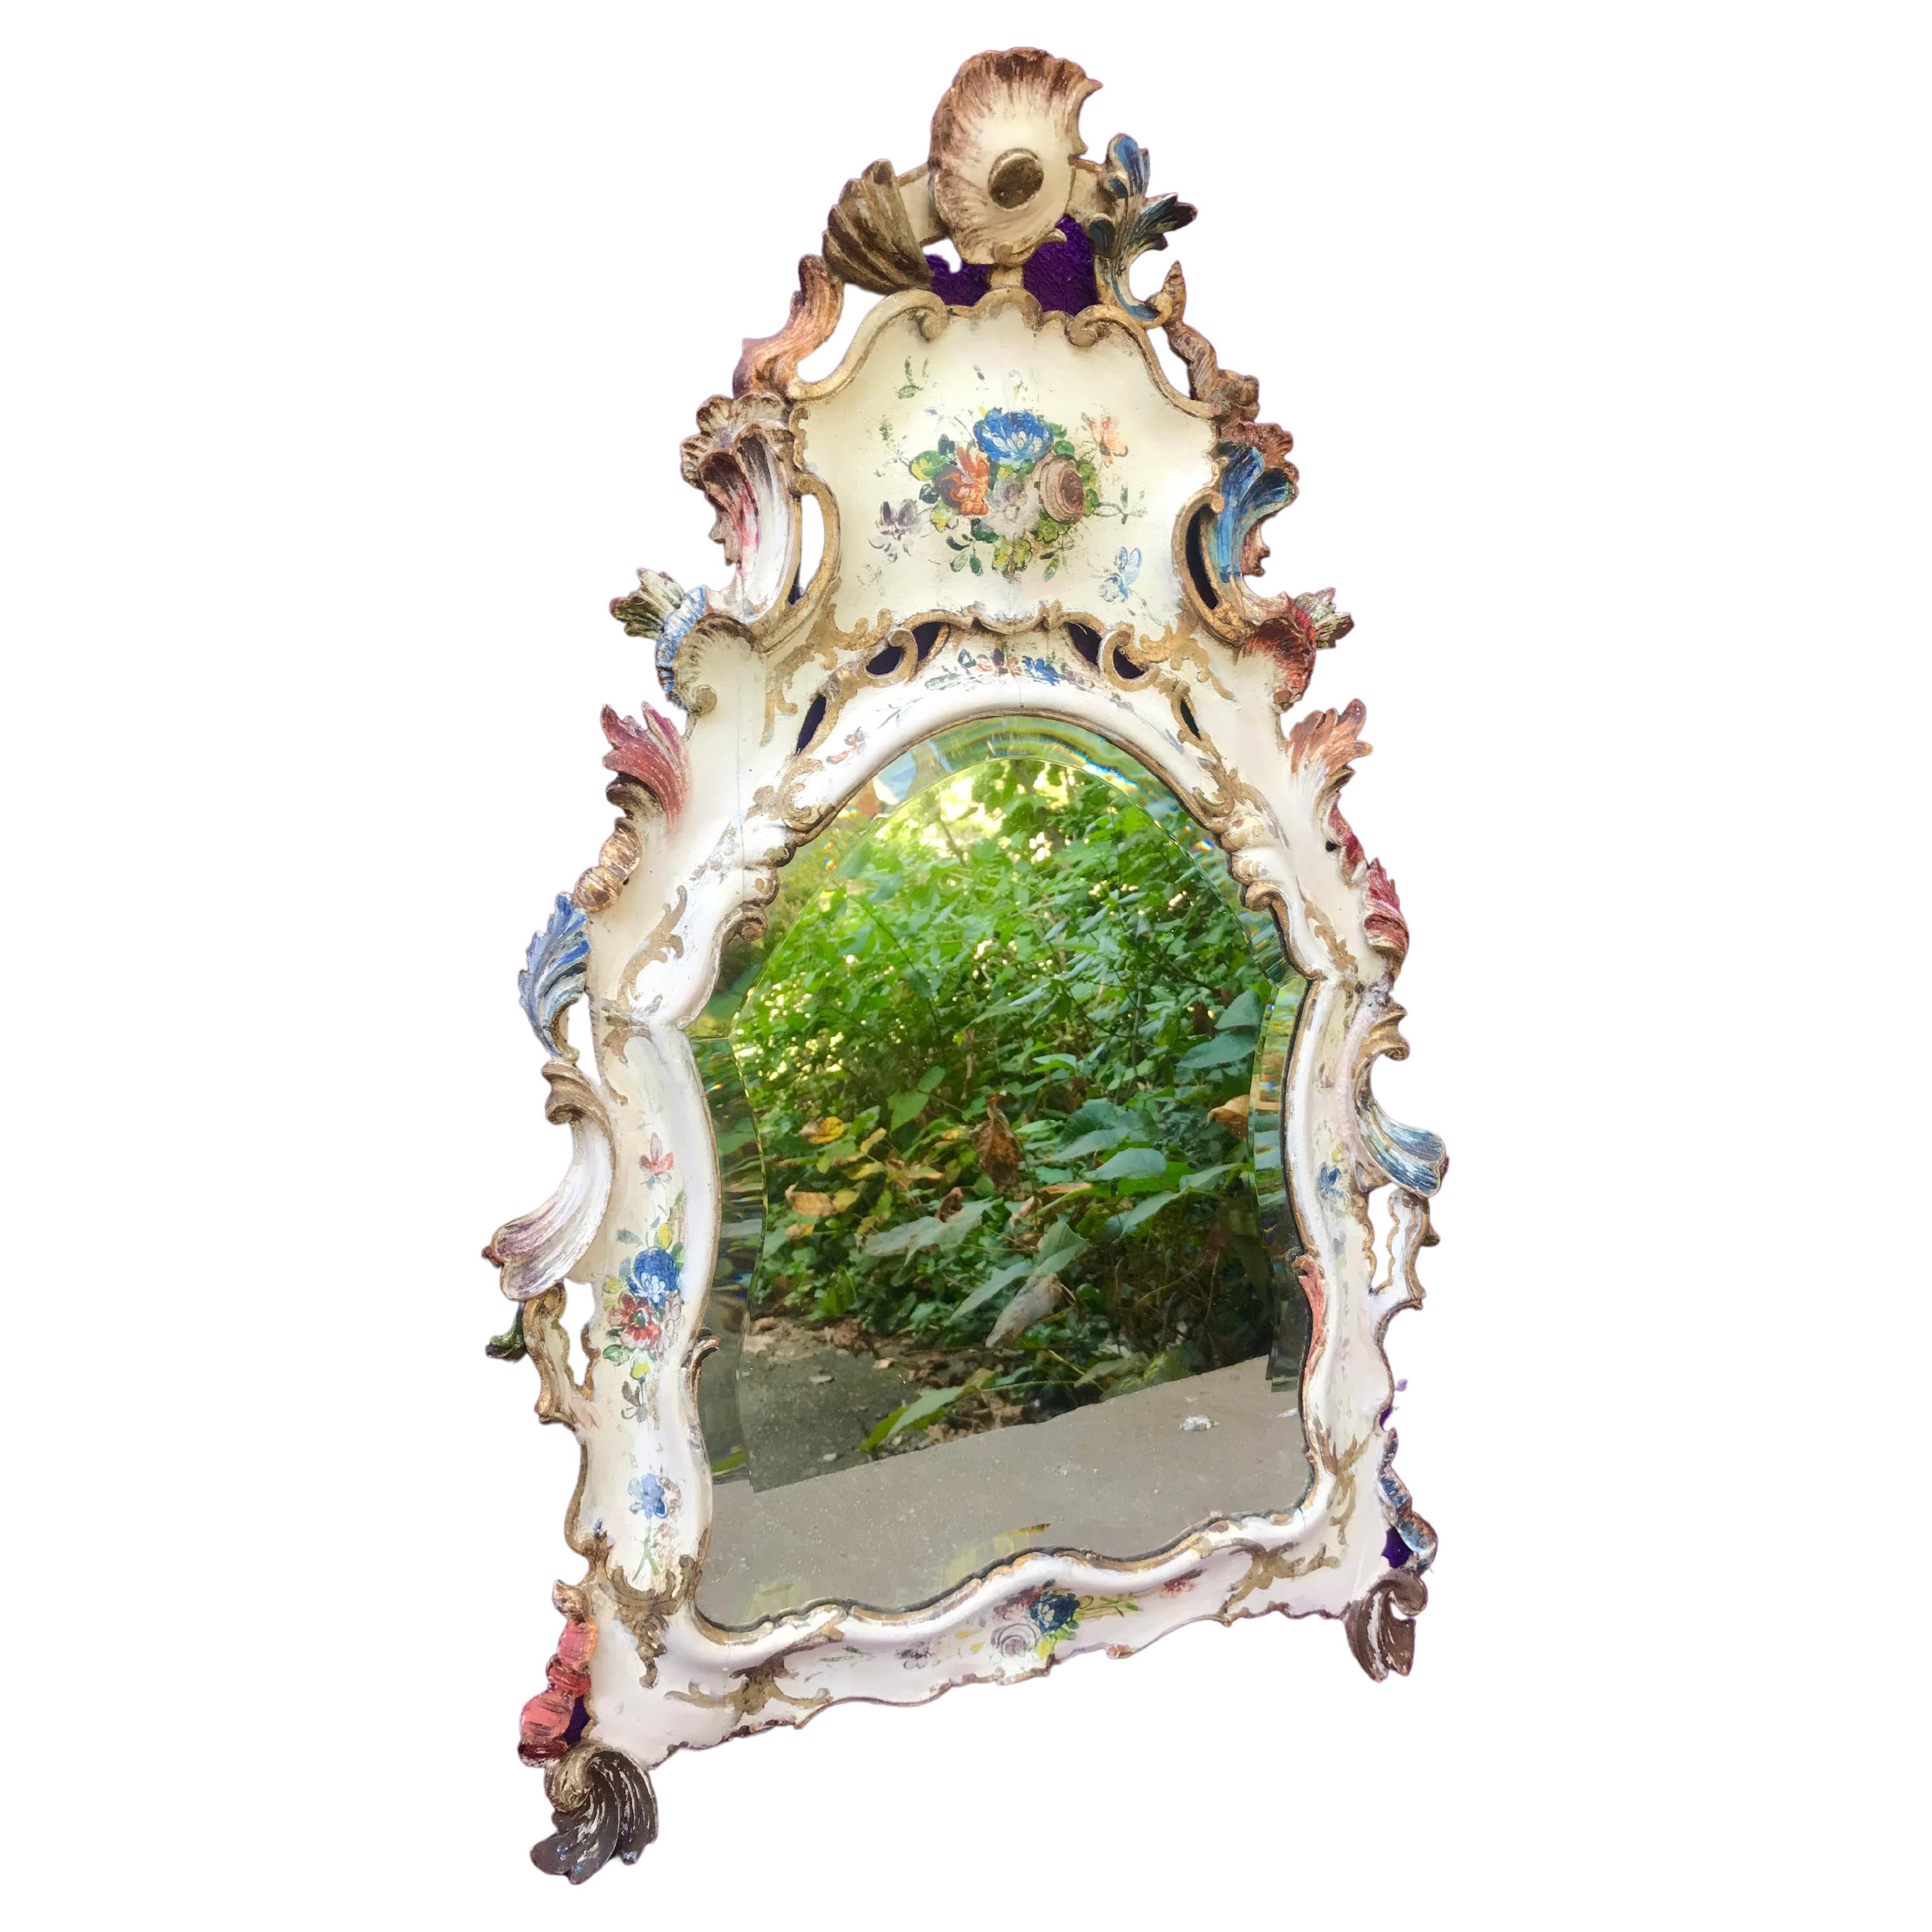 Well worn in a most charming manner a Venetian cartouche shaped mirror with original beveled glass plate ( some loss to age ). Hand carved and tendon joined pine frame. Paint and gilt floral decorated frame with light losses. 

Wear and loss to